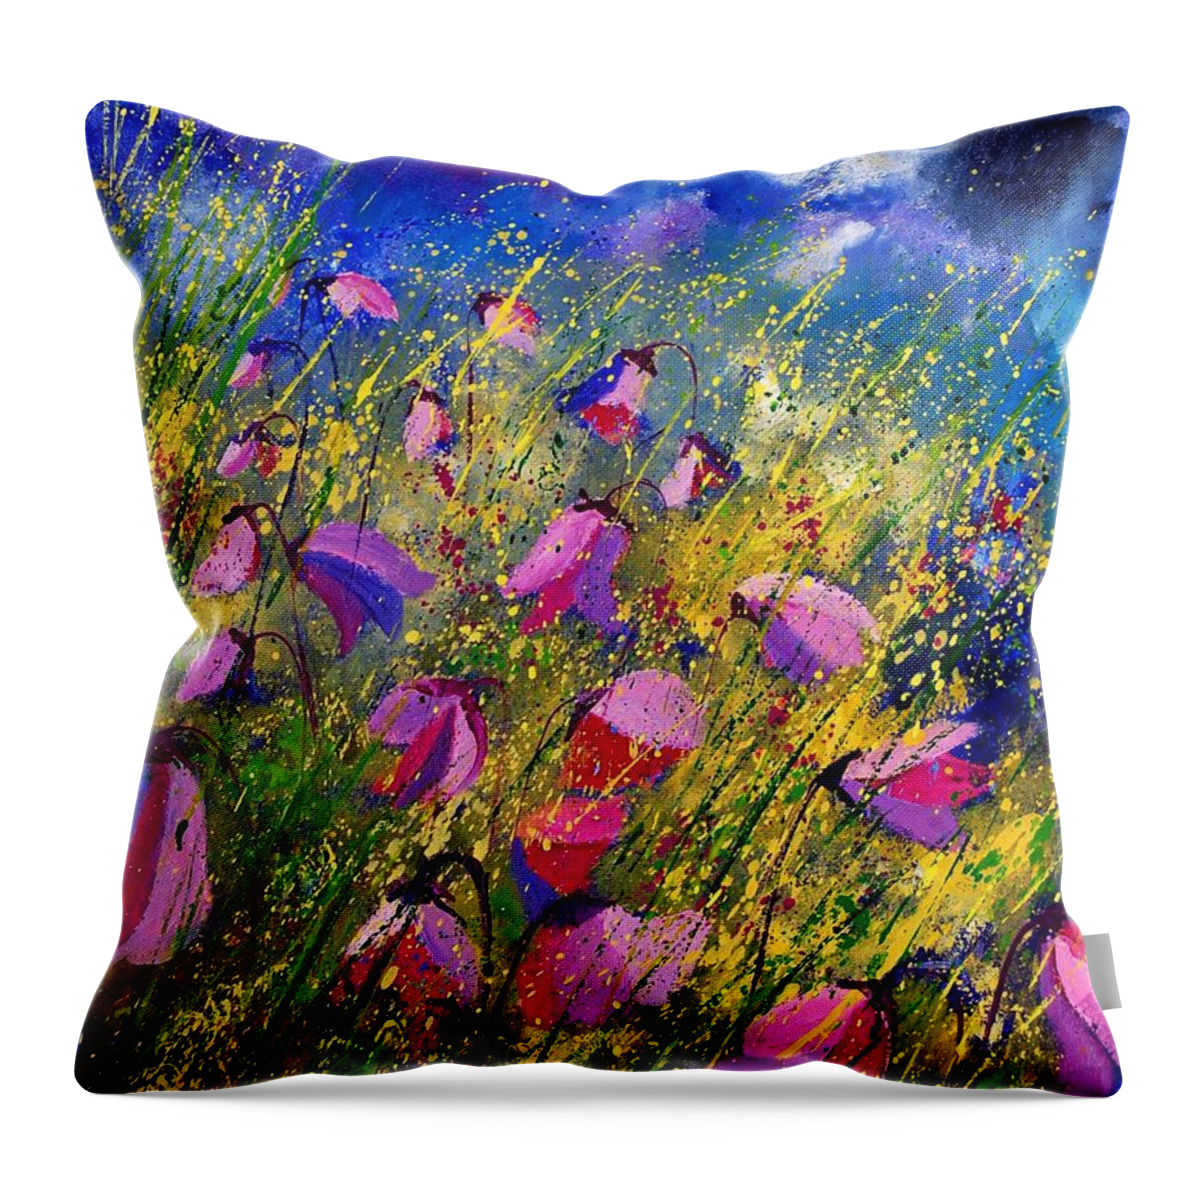 Poppies Throw Pillow featuring the painting Purple Wild Flowers by Pol Ledent